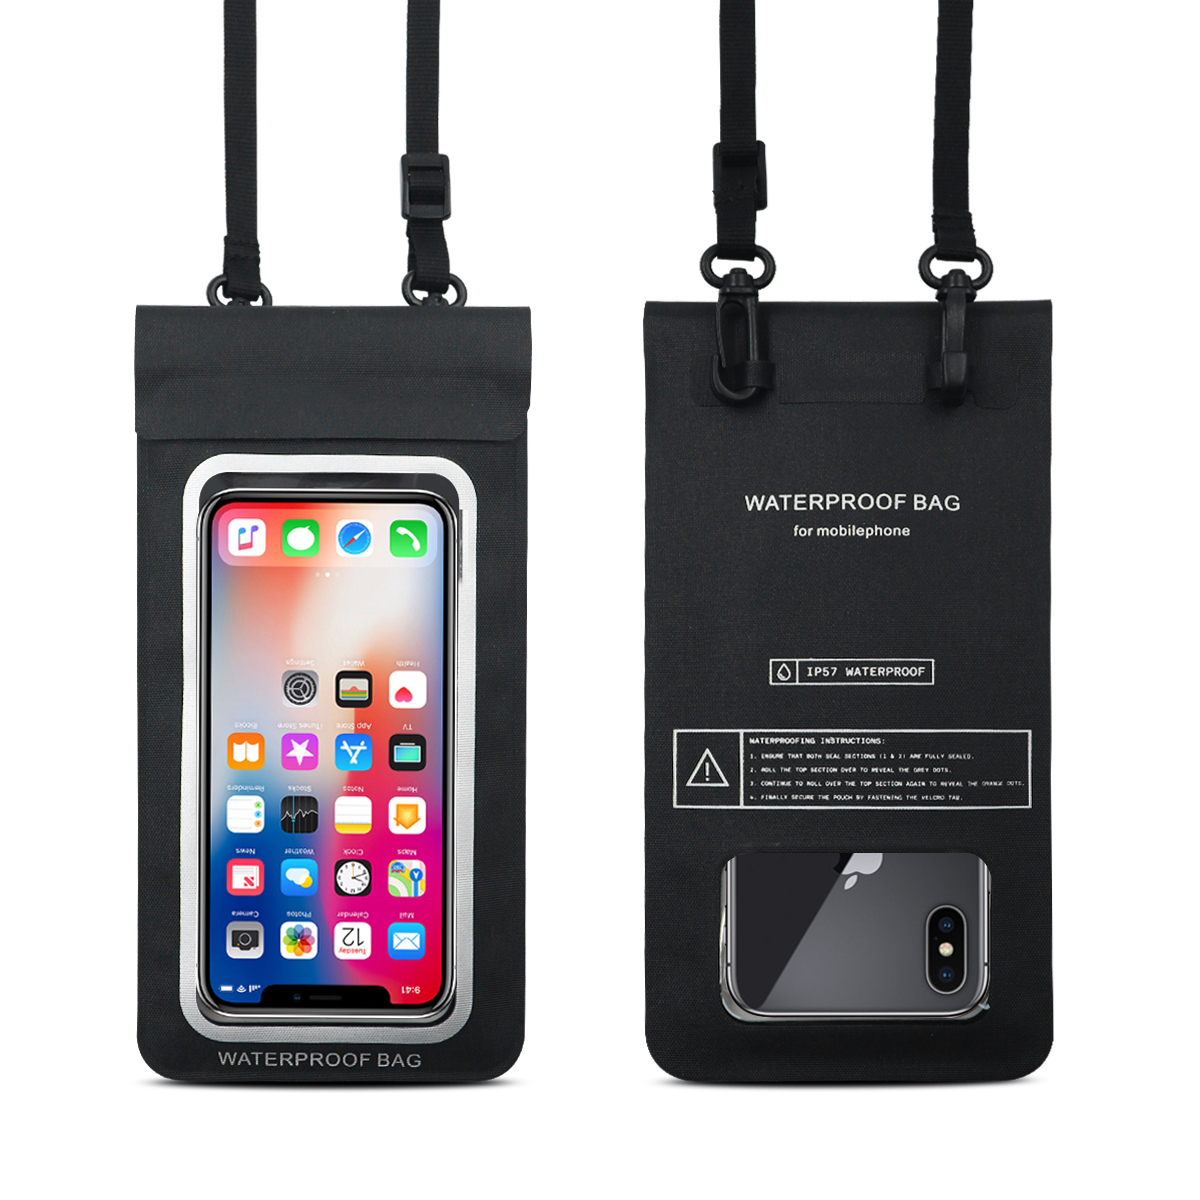 prosync cell phone accessories